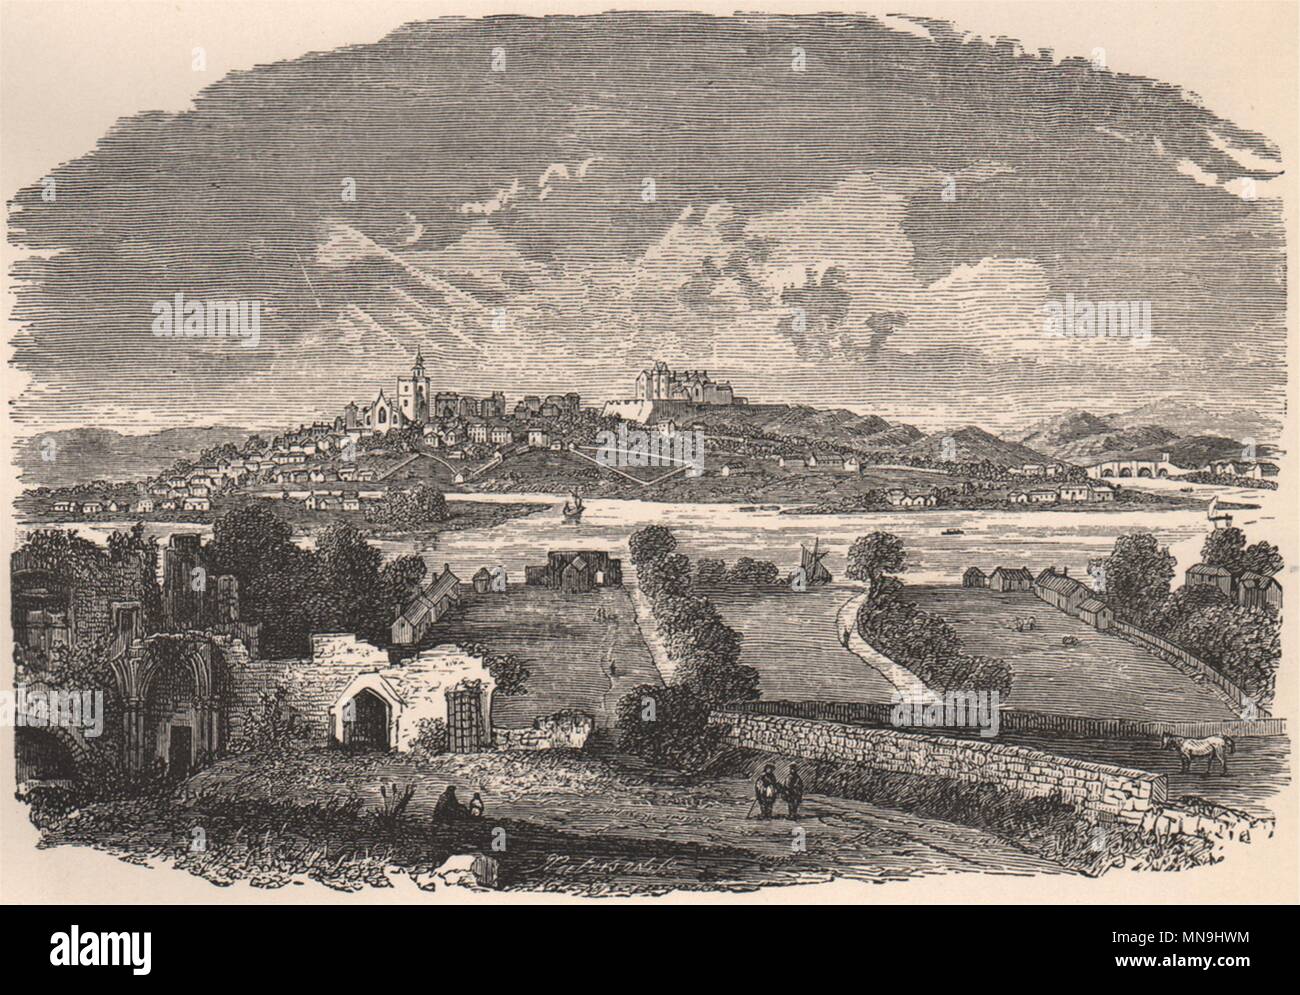 STIRLING. View in the beginning of the 18th century. Scotland 1885 old ...